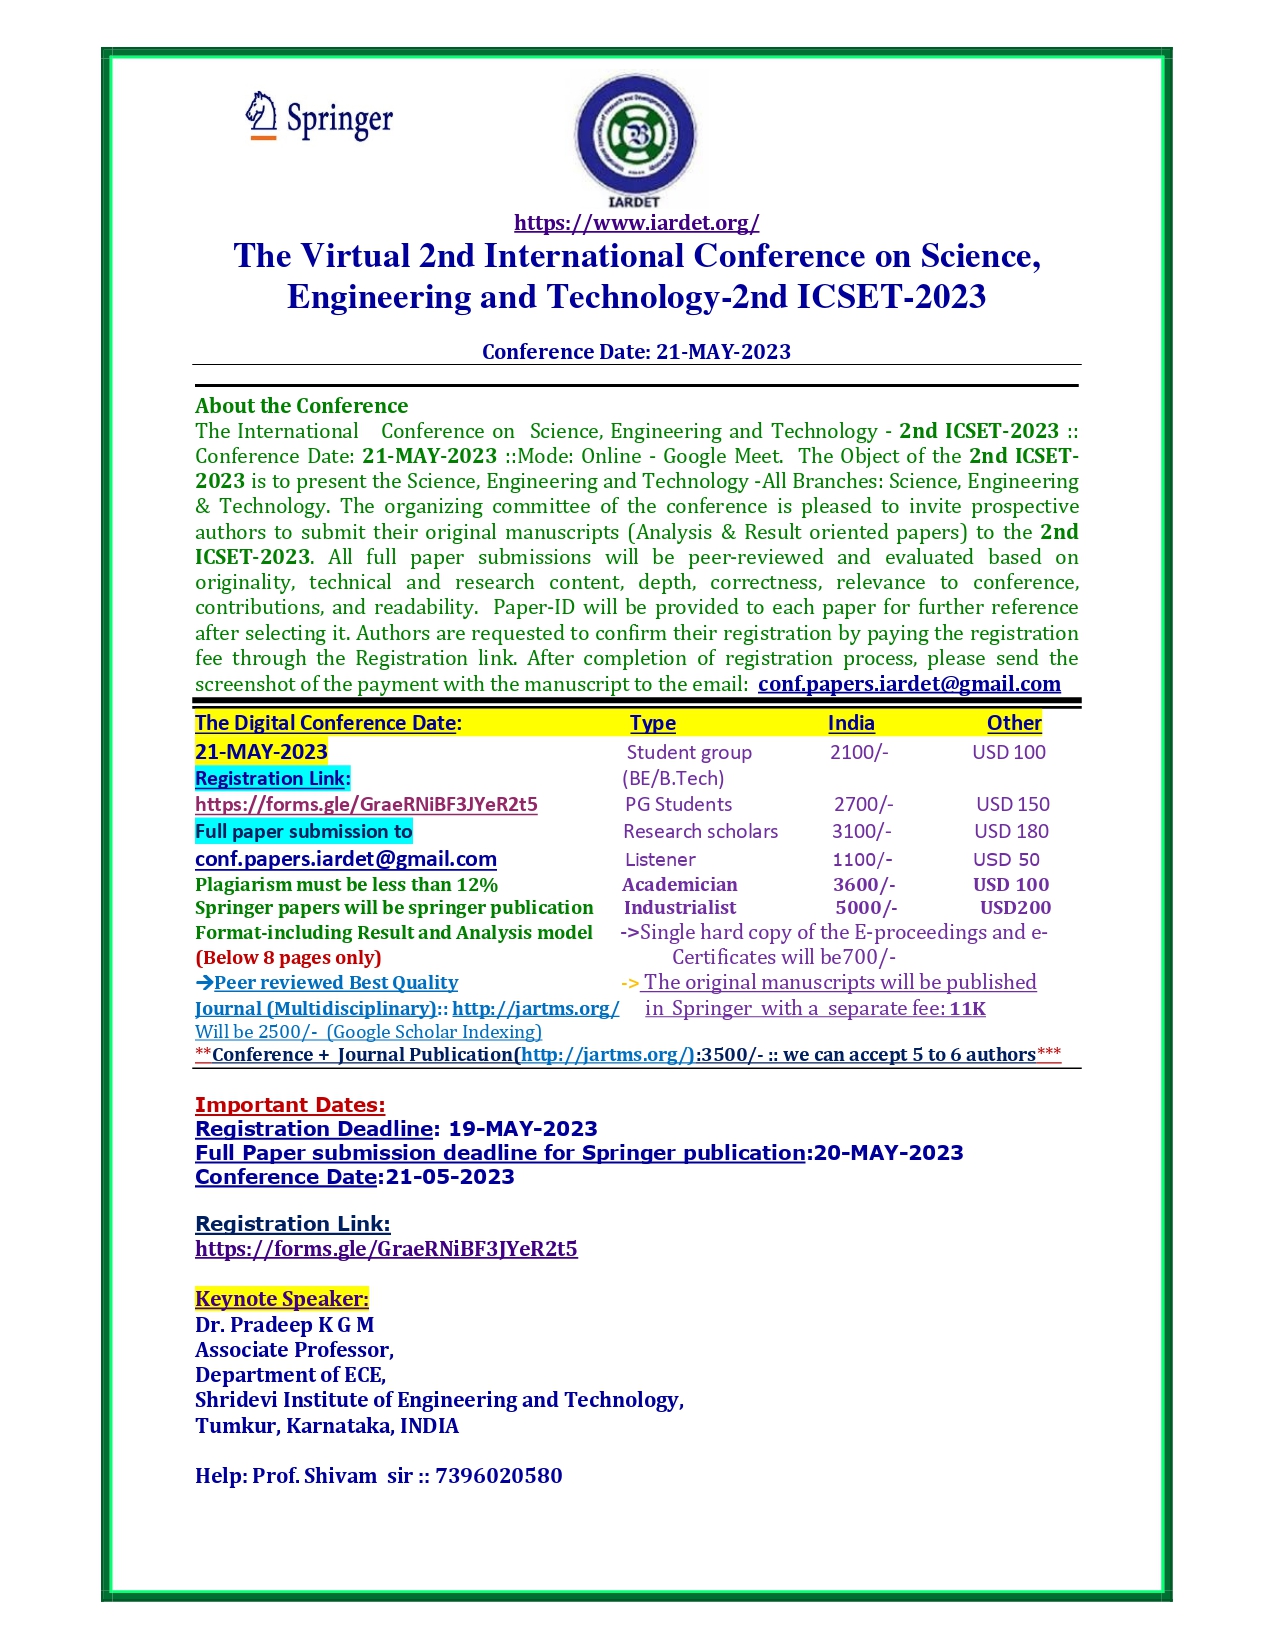 2nd International Conference on Science, Engineering and Technology-2nd ICSET-2023